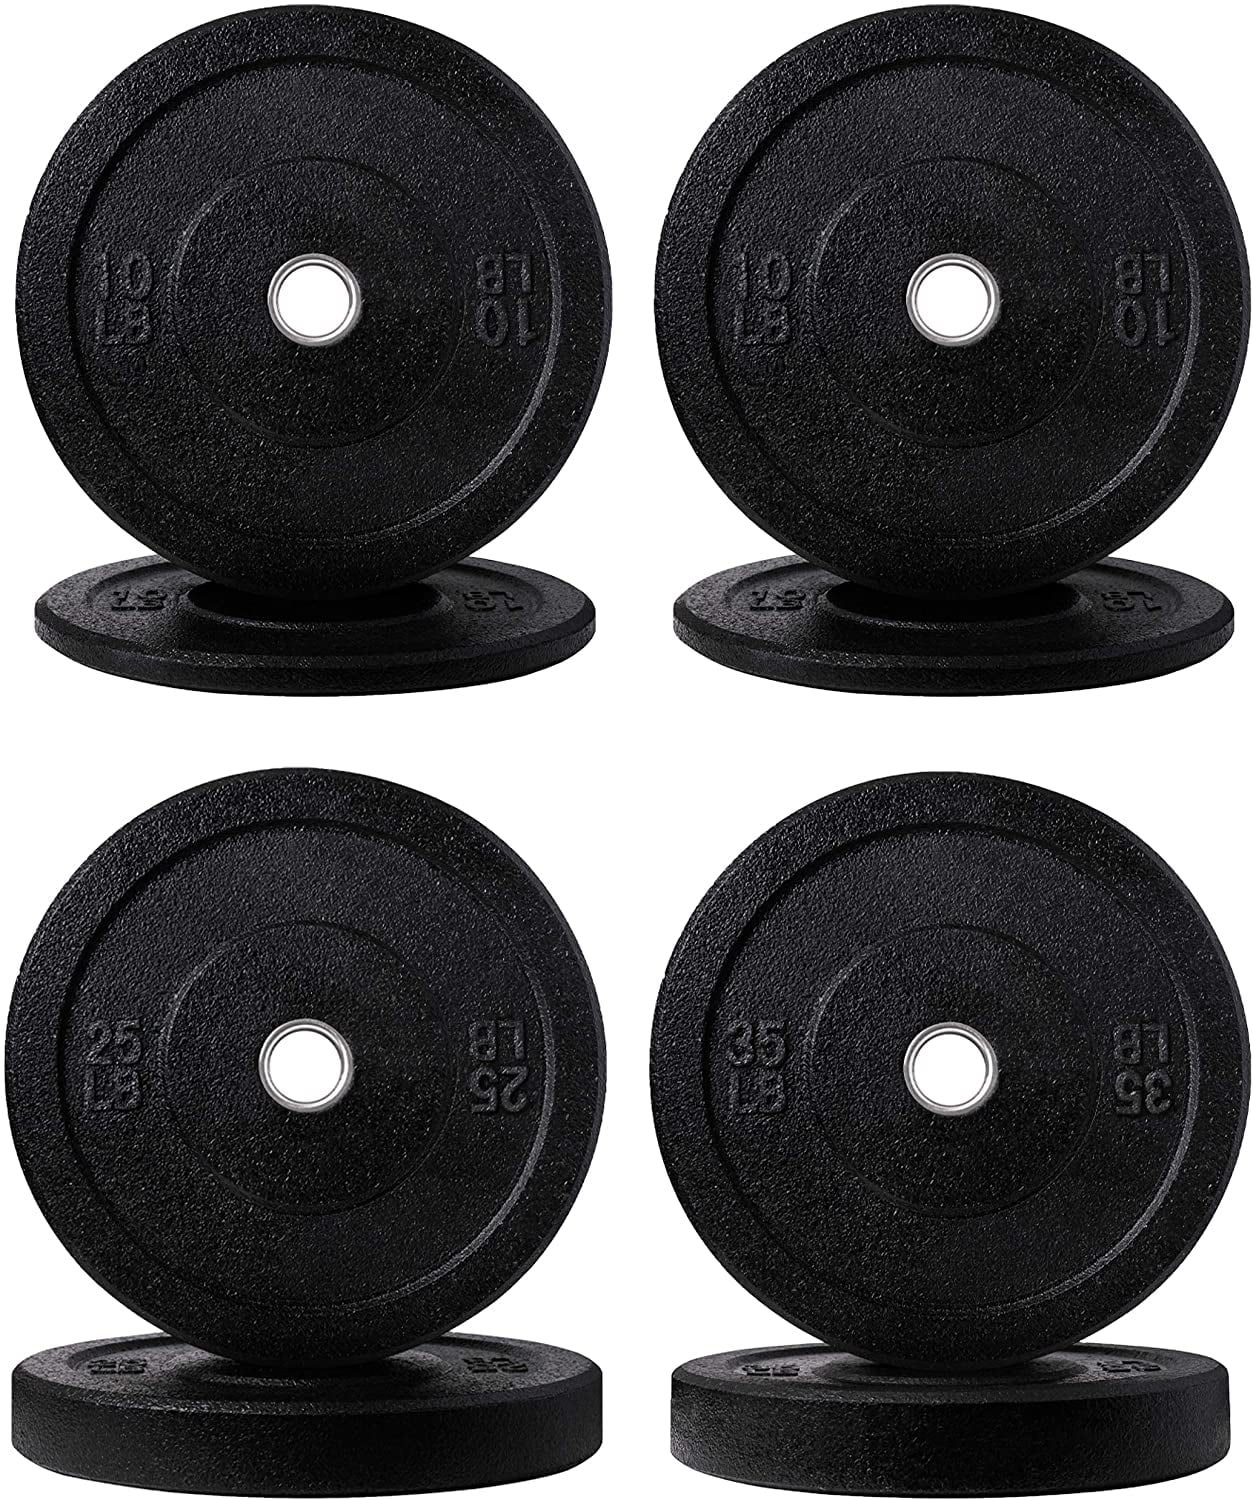 Stainless Steel Inserts Strength Training Plates Weight Lifting Plates Zion Fitness Magma 2 Inch Lb Crumb Bumper Plates Set Olympic Weight Plates Rubber Bumper Weight Plate Pair 